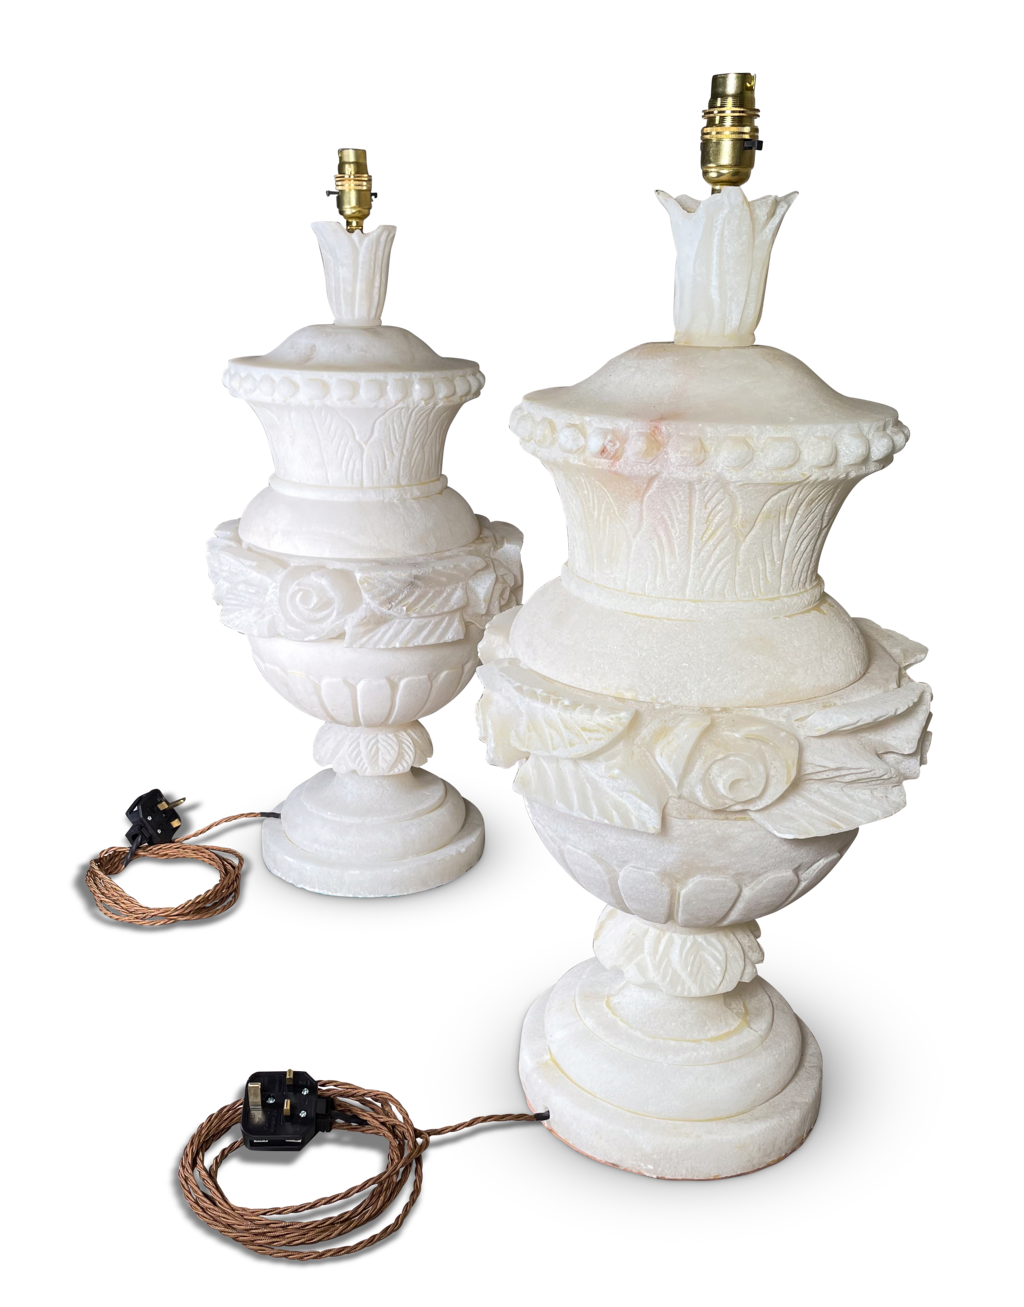 Pair of Large Alabaster Urn Table Lamps